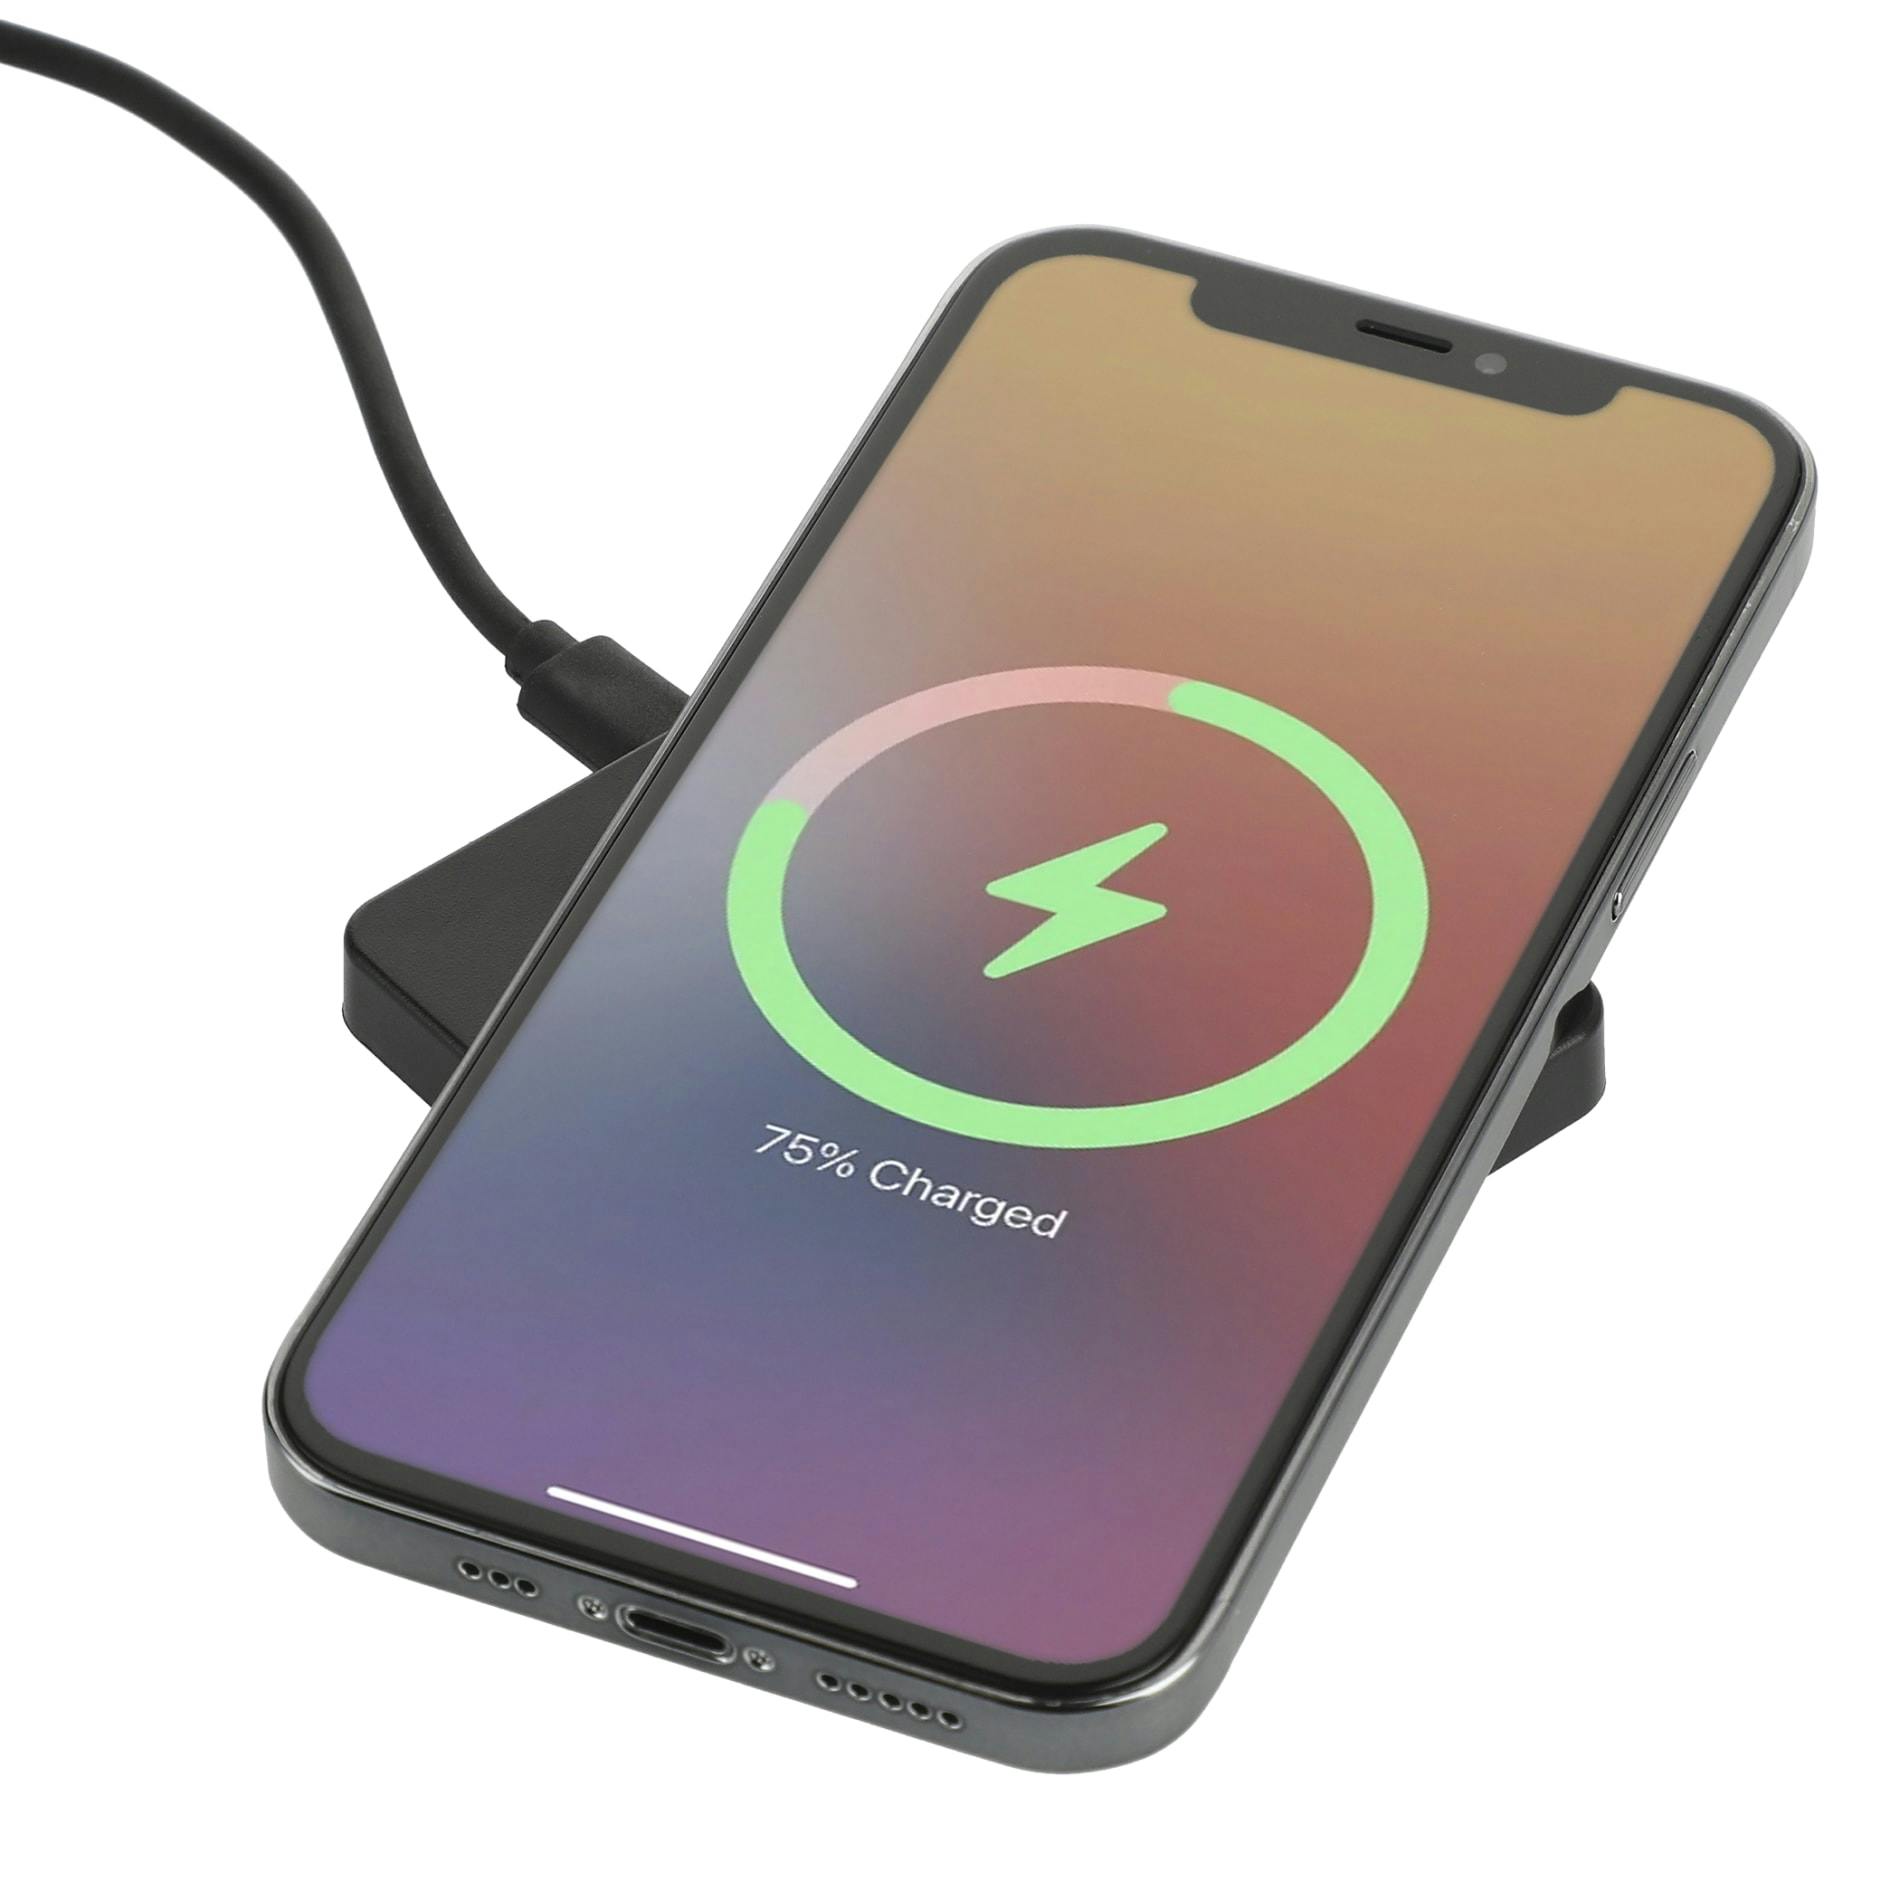 Square Wireless Charging Pad - additional Image 3